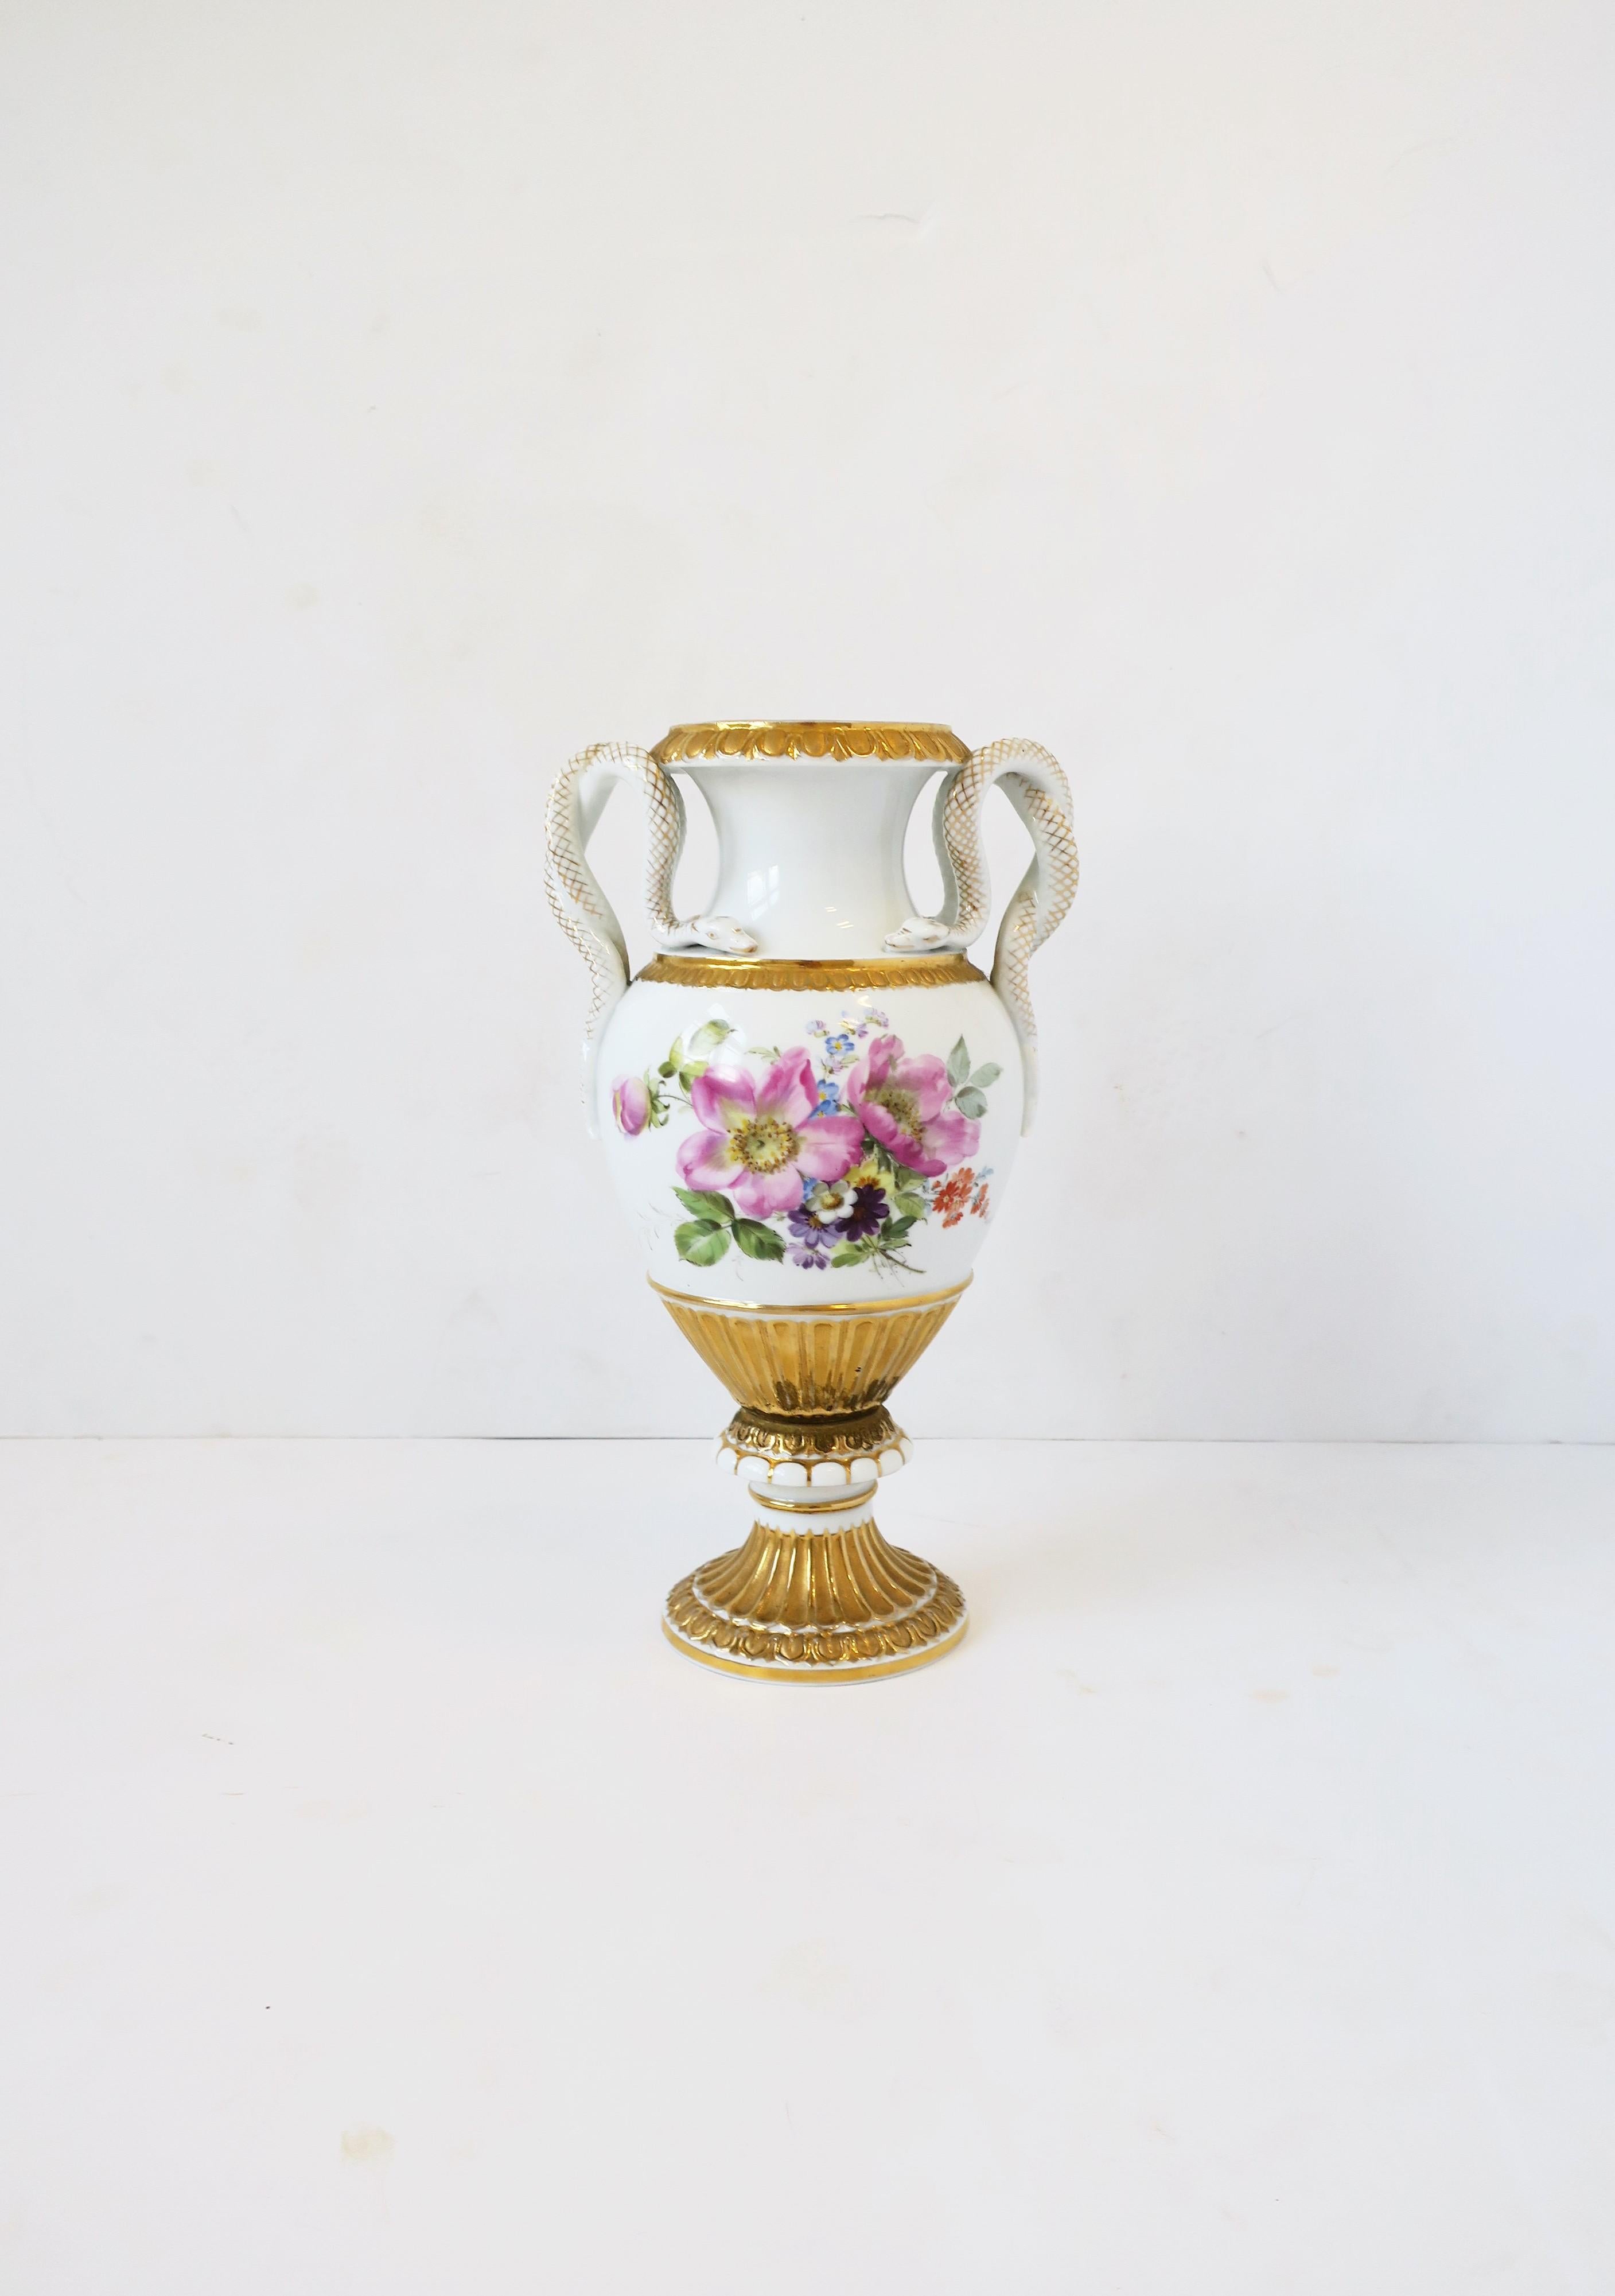 An antique Meissen porcelain urn with snake handles amphora, circa early-20th century, Germany. This Meissen urn is hard-paste porcelain, hand painted, featuring two different floral motifs, scrolled snake handles with 'snakeskin' detail in gold,